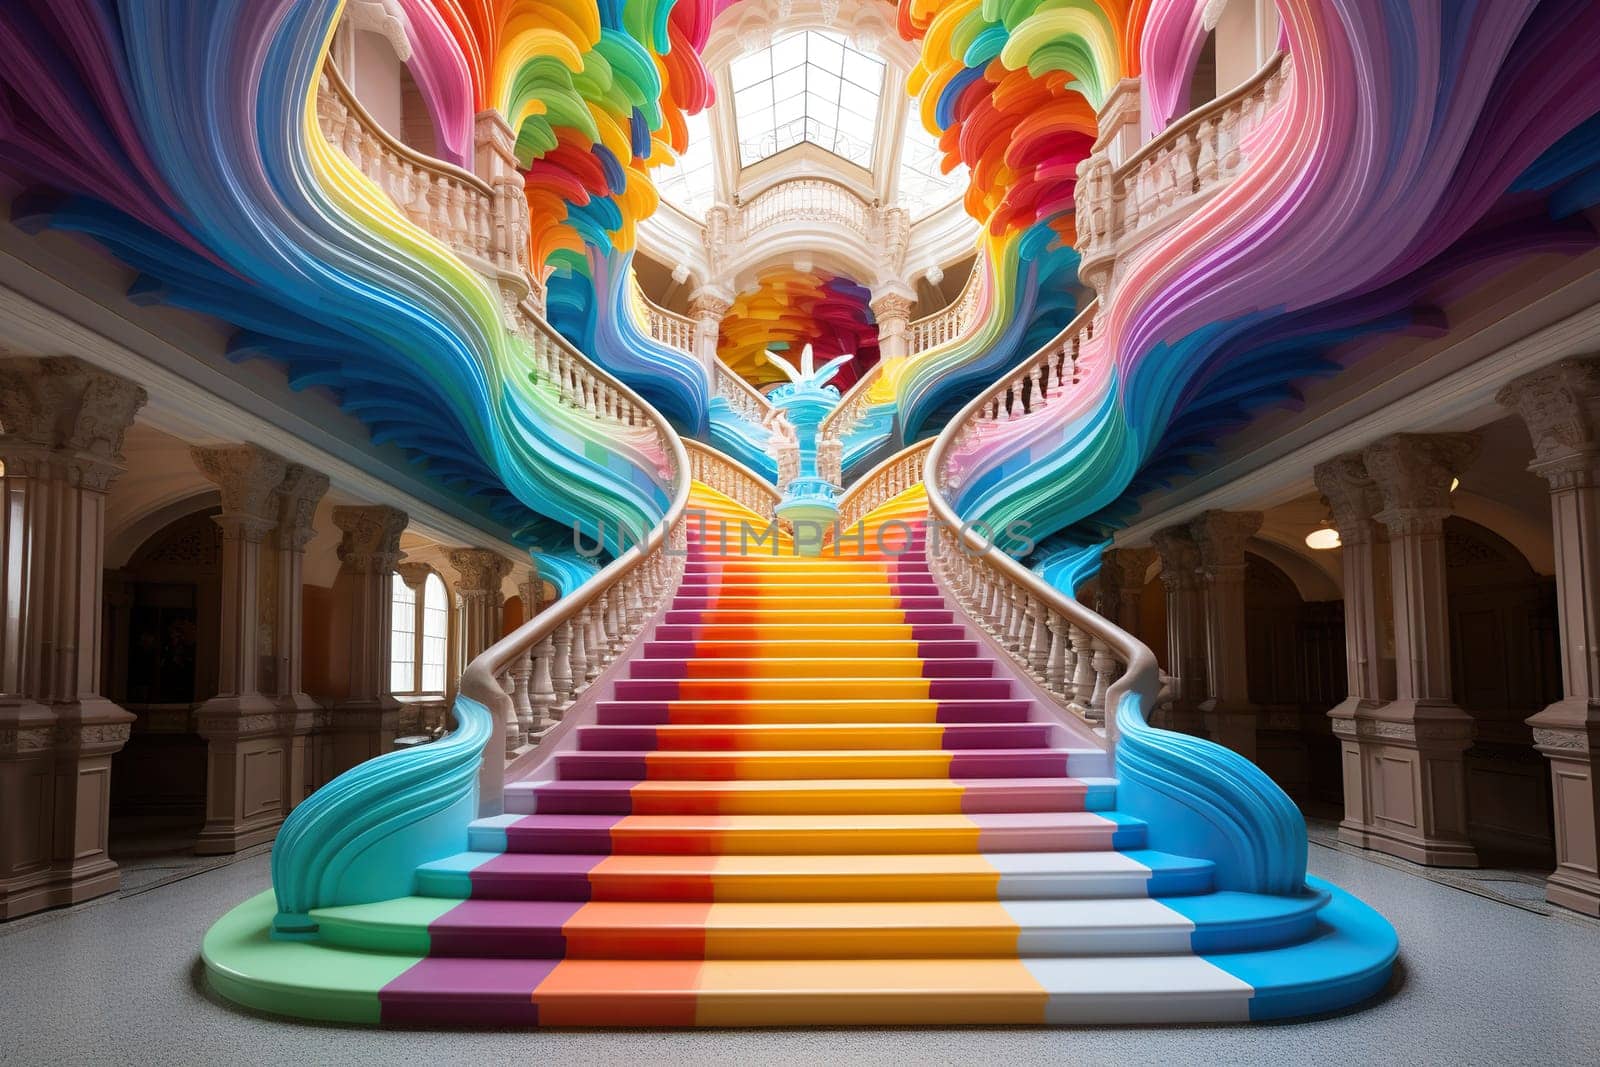 Multi-colored high staircase indoors . Rainbow colored steps.